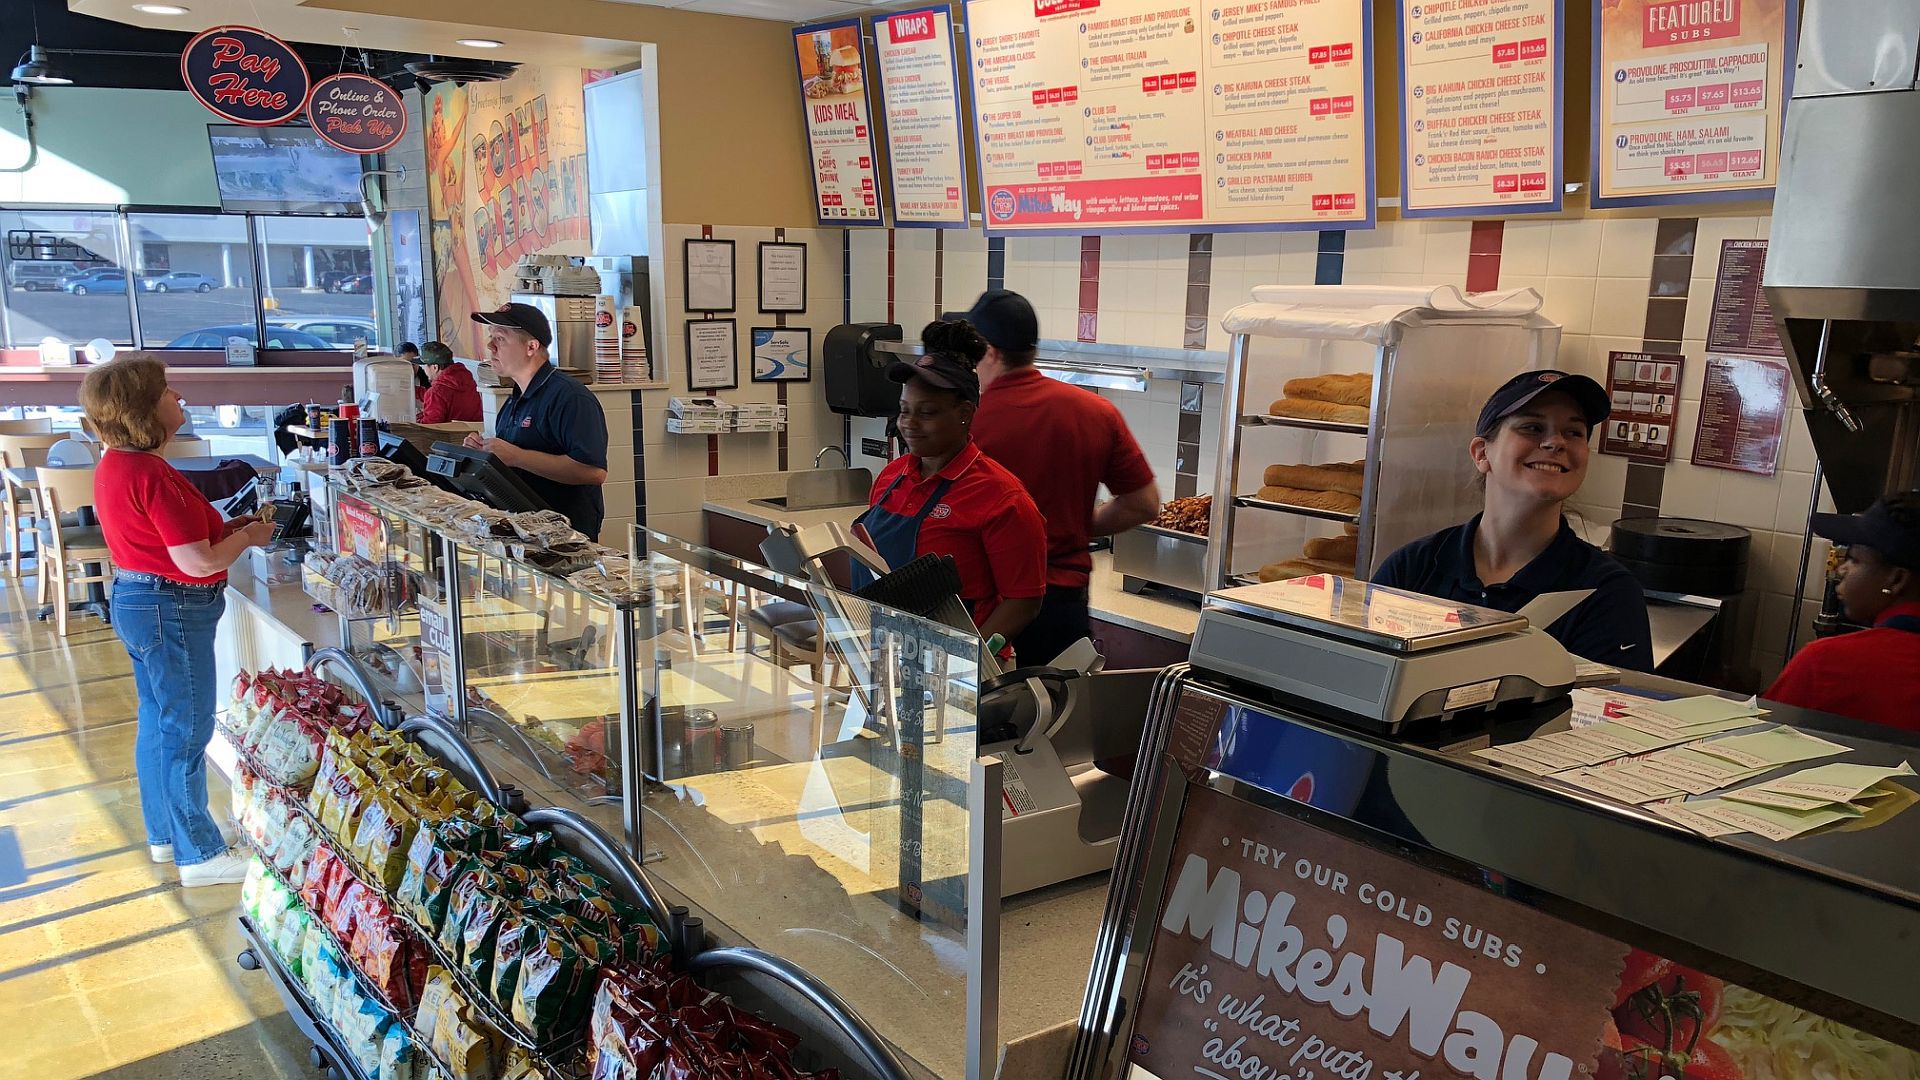 jersey mike's sub shop near me